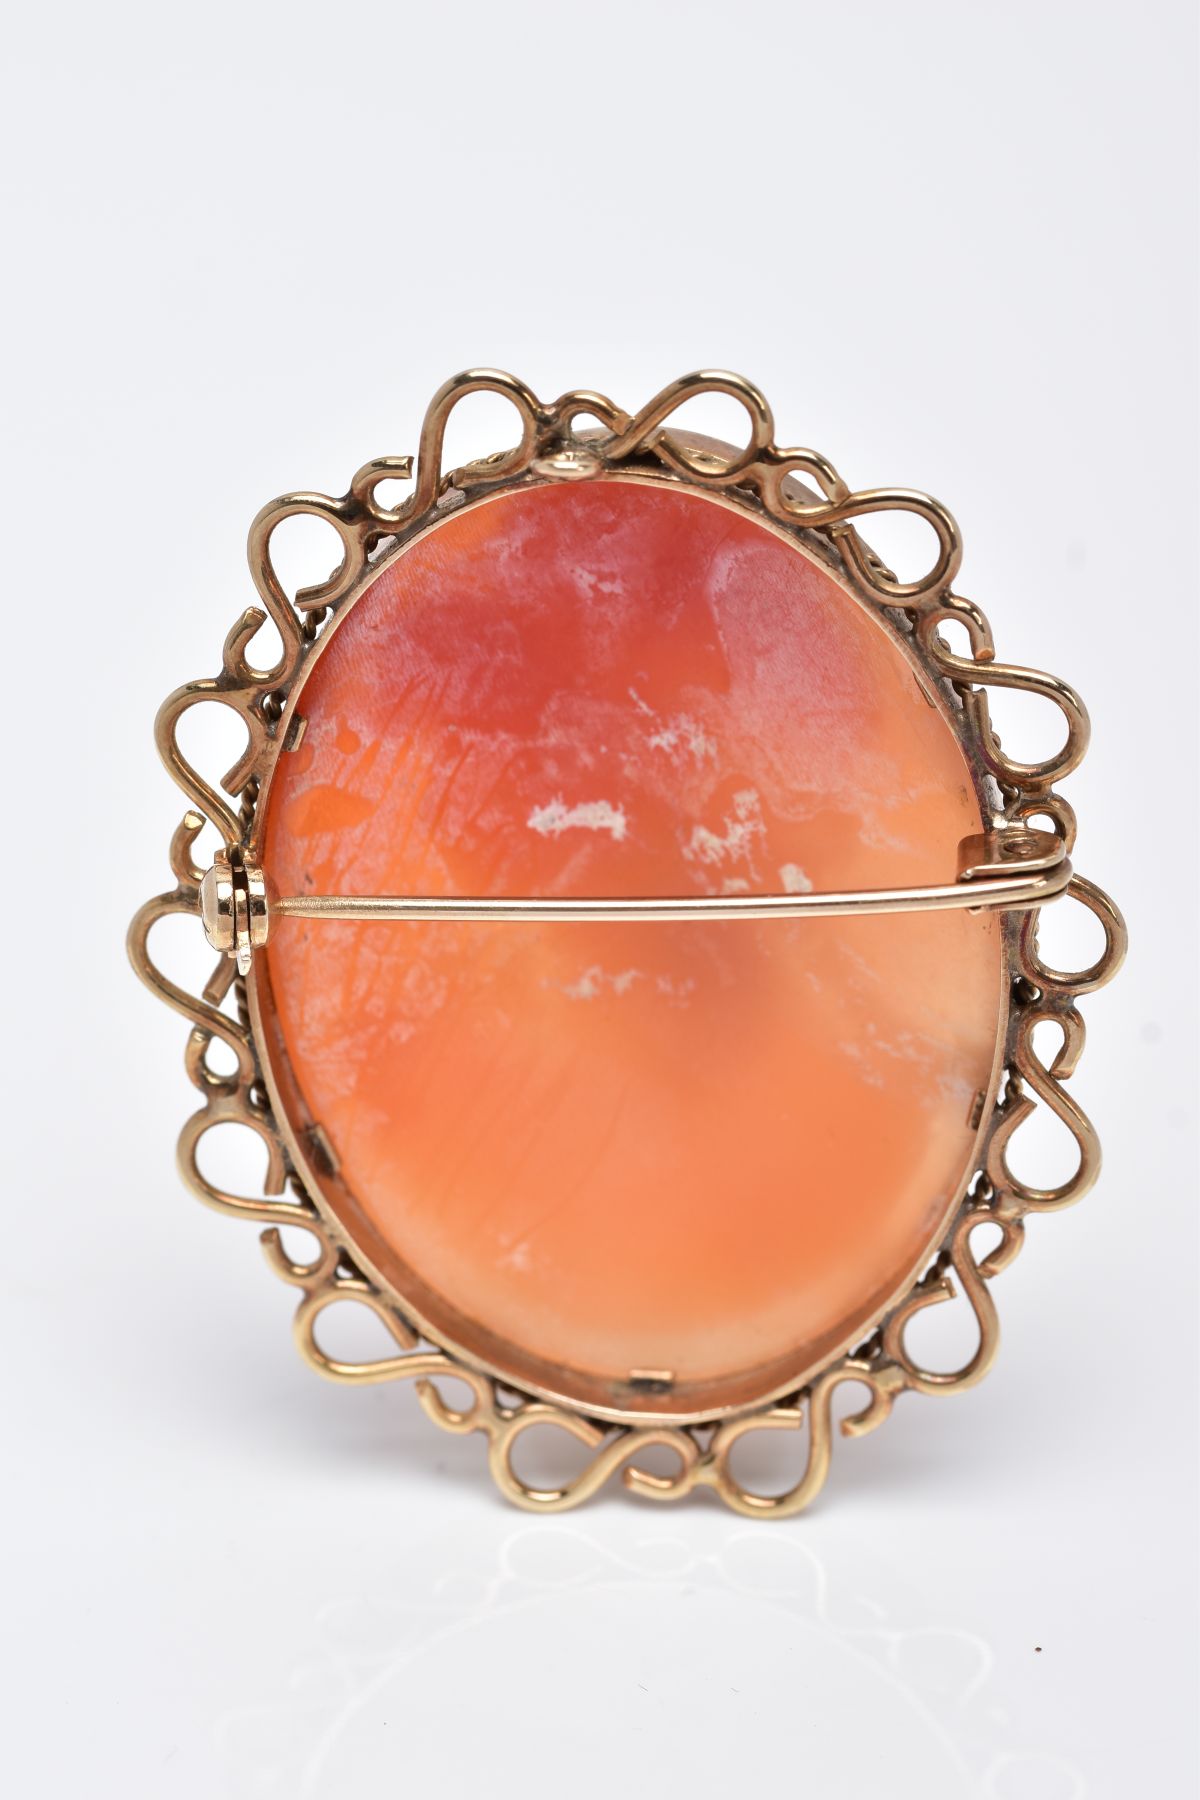 A 9CT GOLD CAMEO BROOCH, of an oval form, depicting a lady in profile, within a millegrain setting - Image 3 of 3